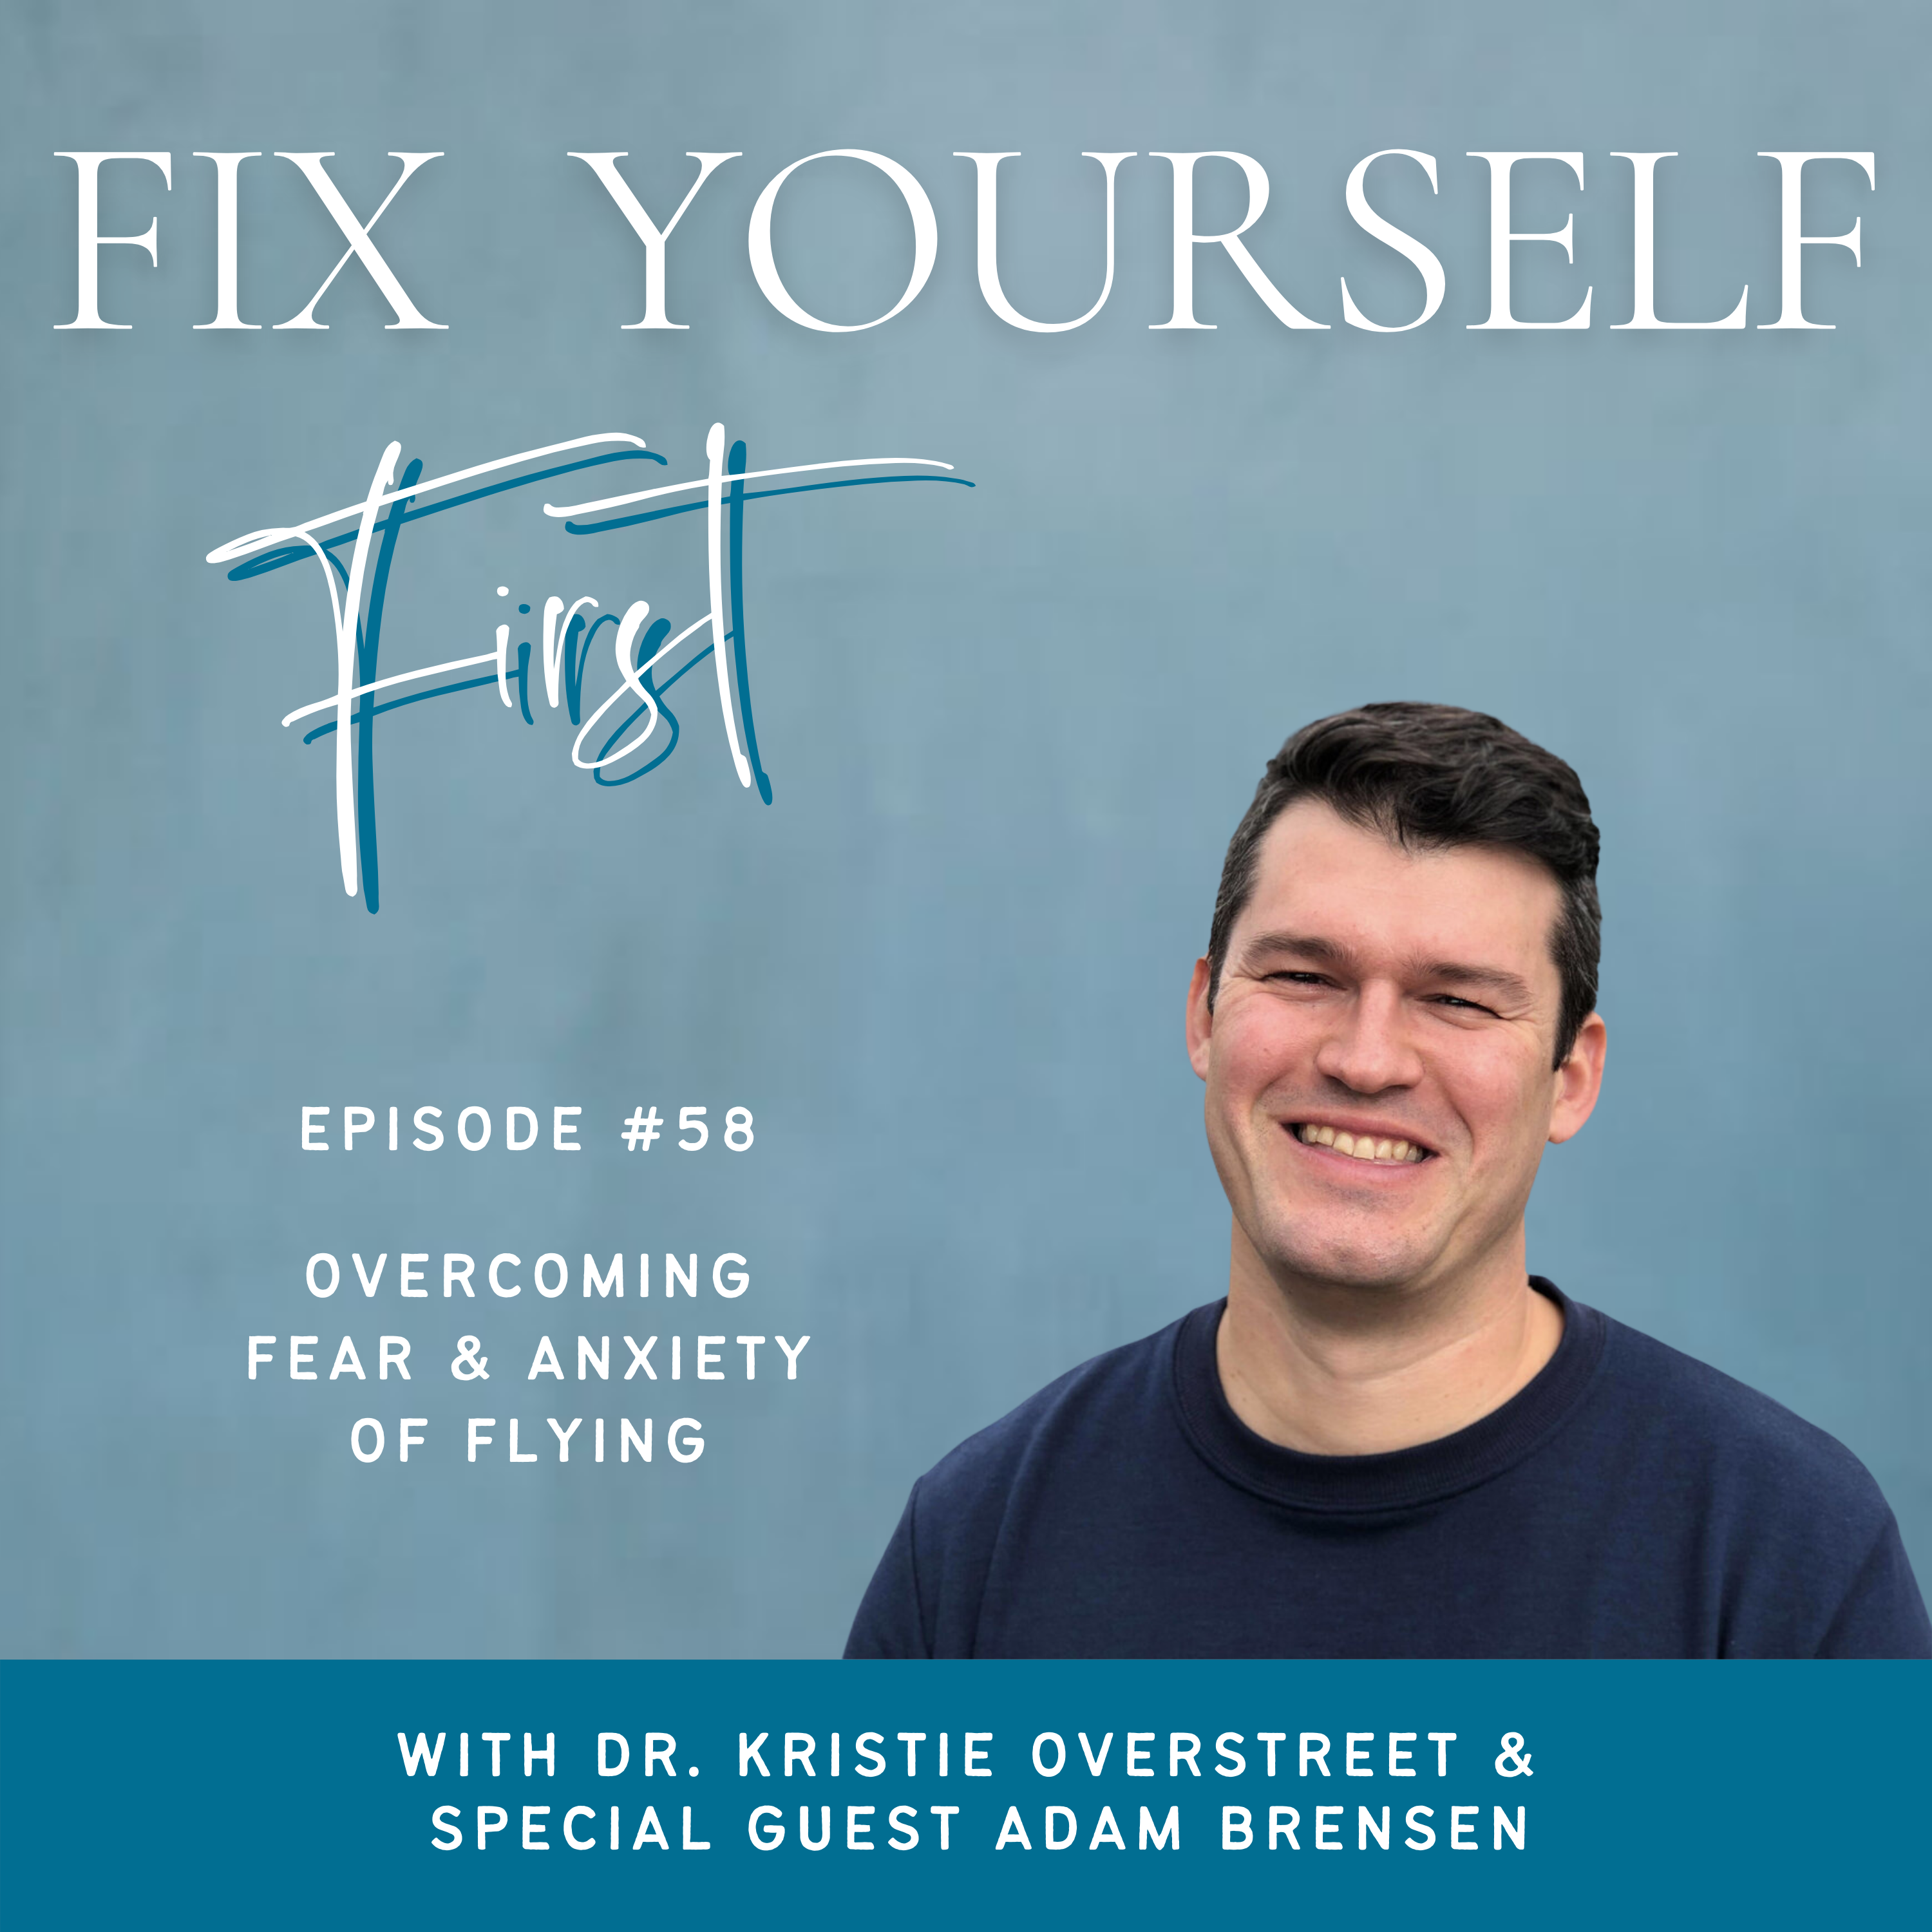 Fix Yourself First - Episode 58